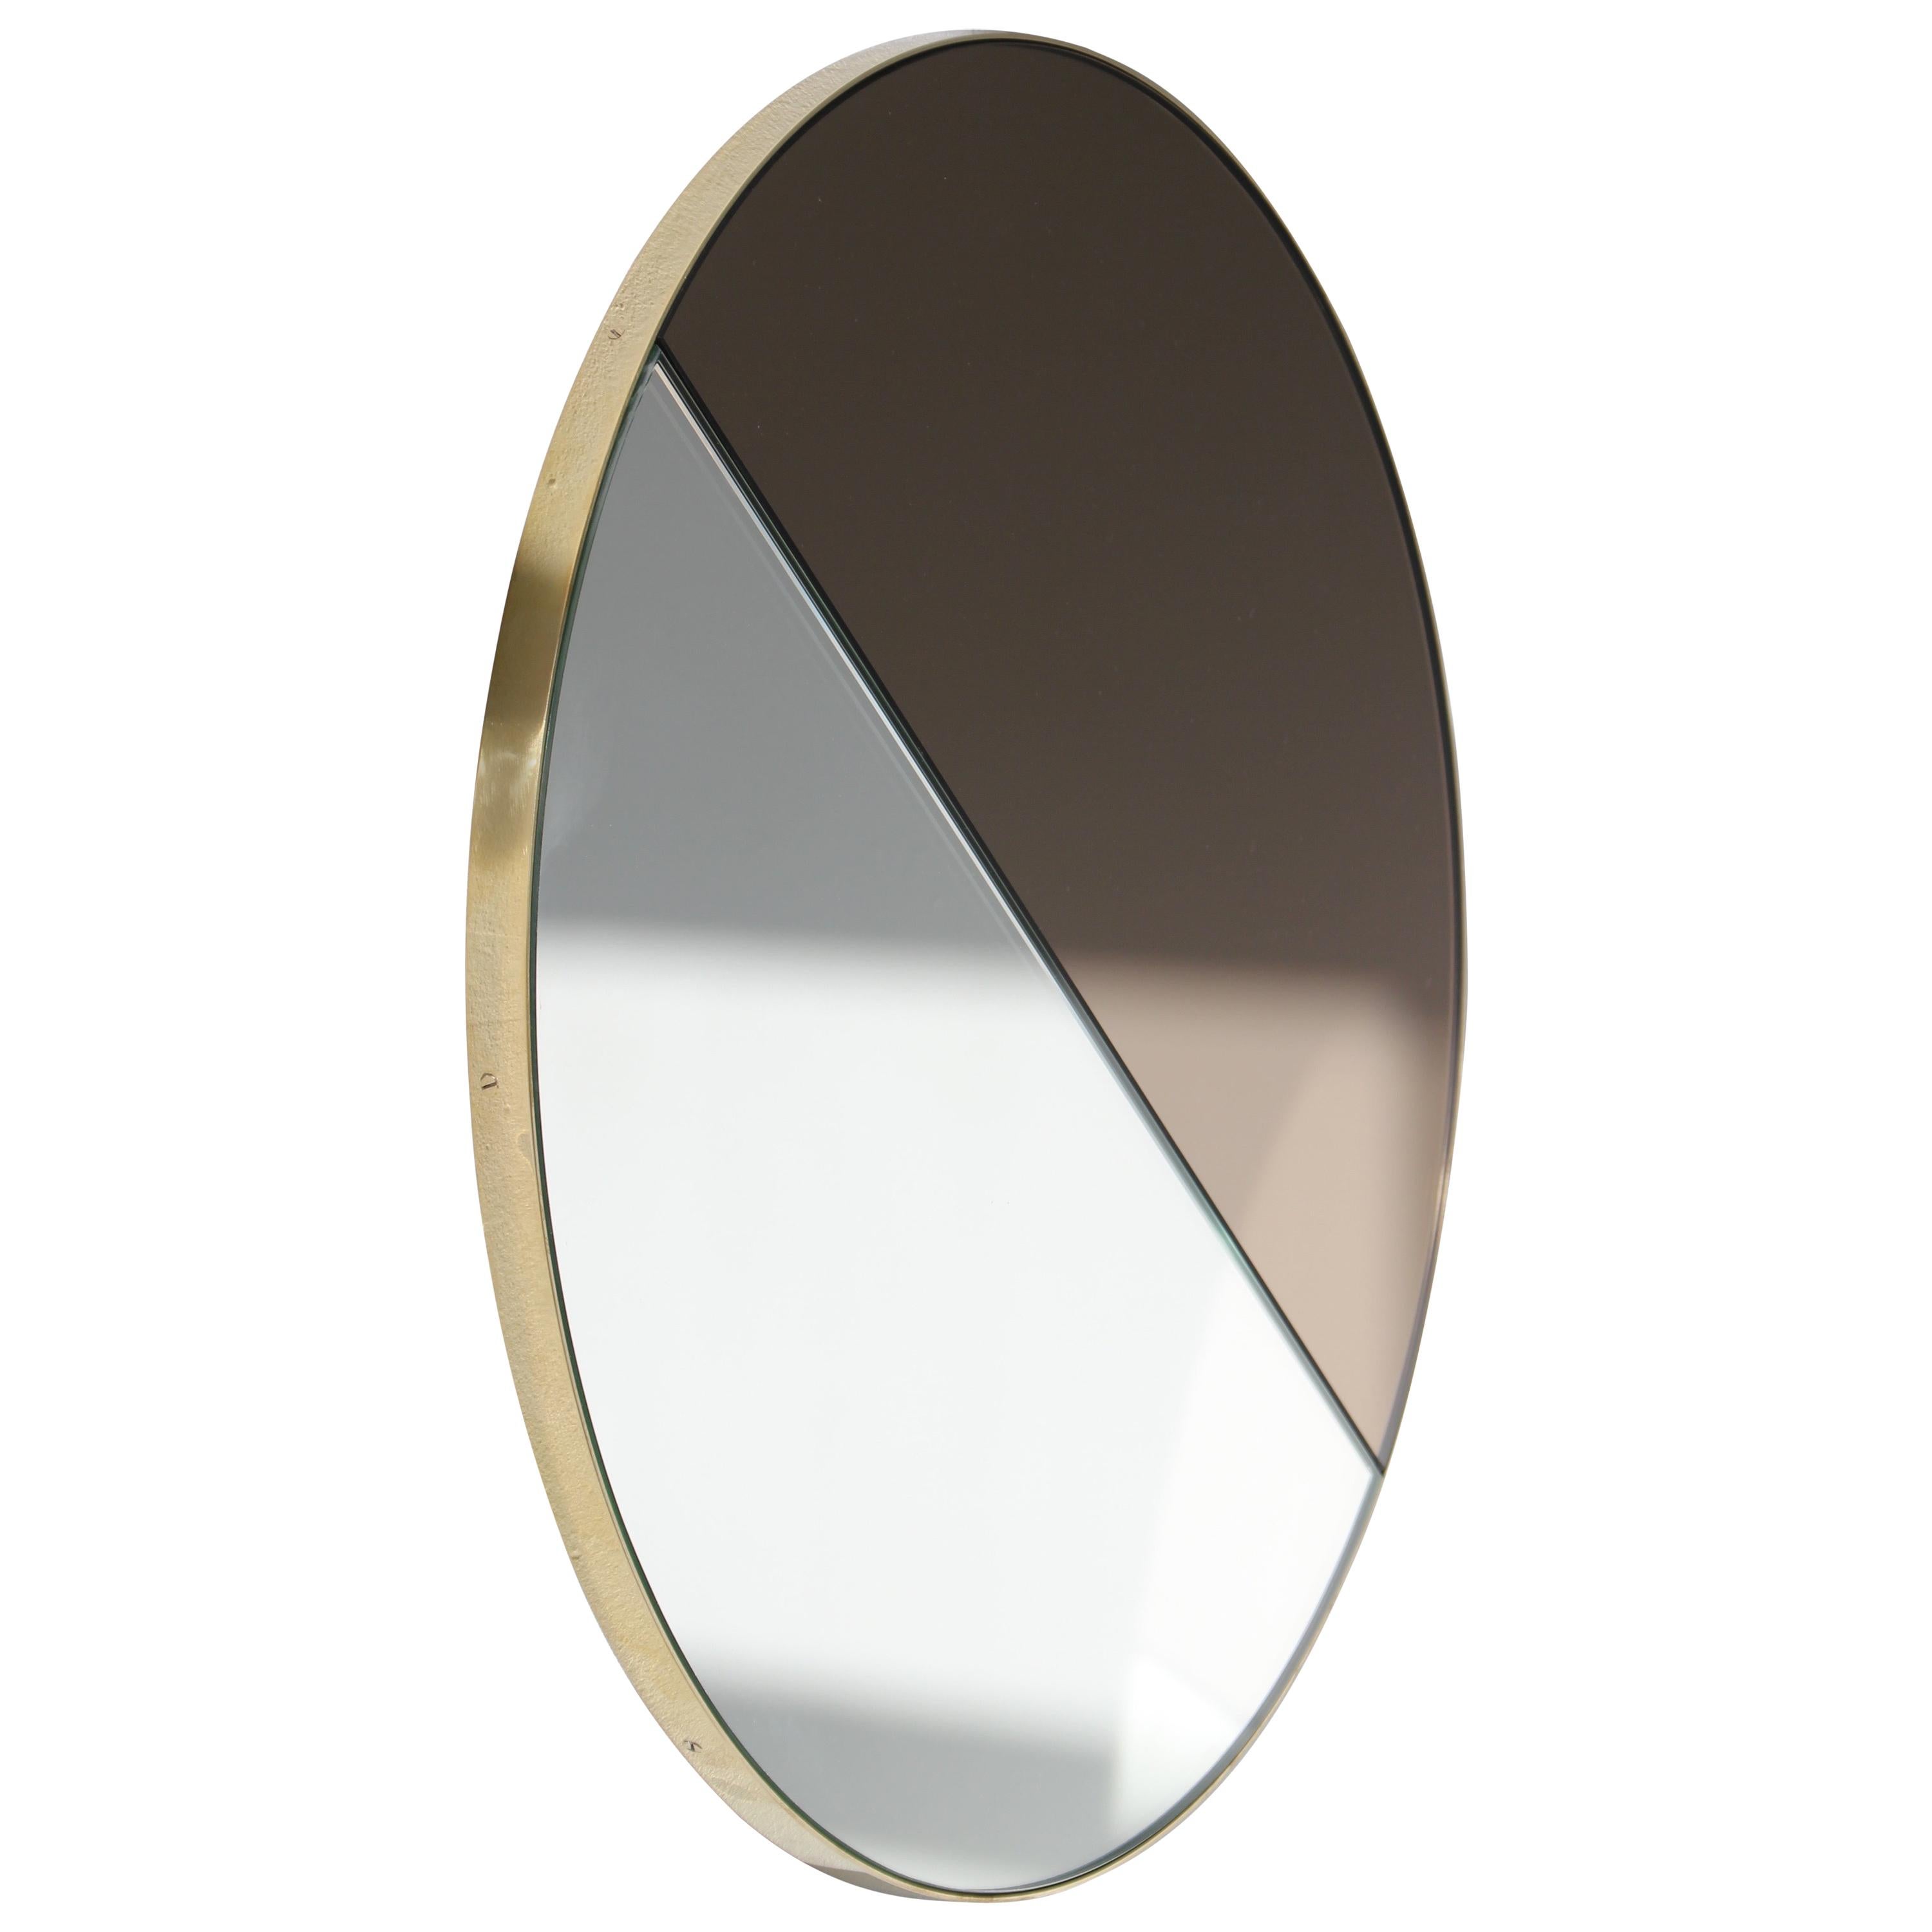 Orbis Dualis Mixed Tinted Silver and Bronze Round Mirror with Brass Frame, XL